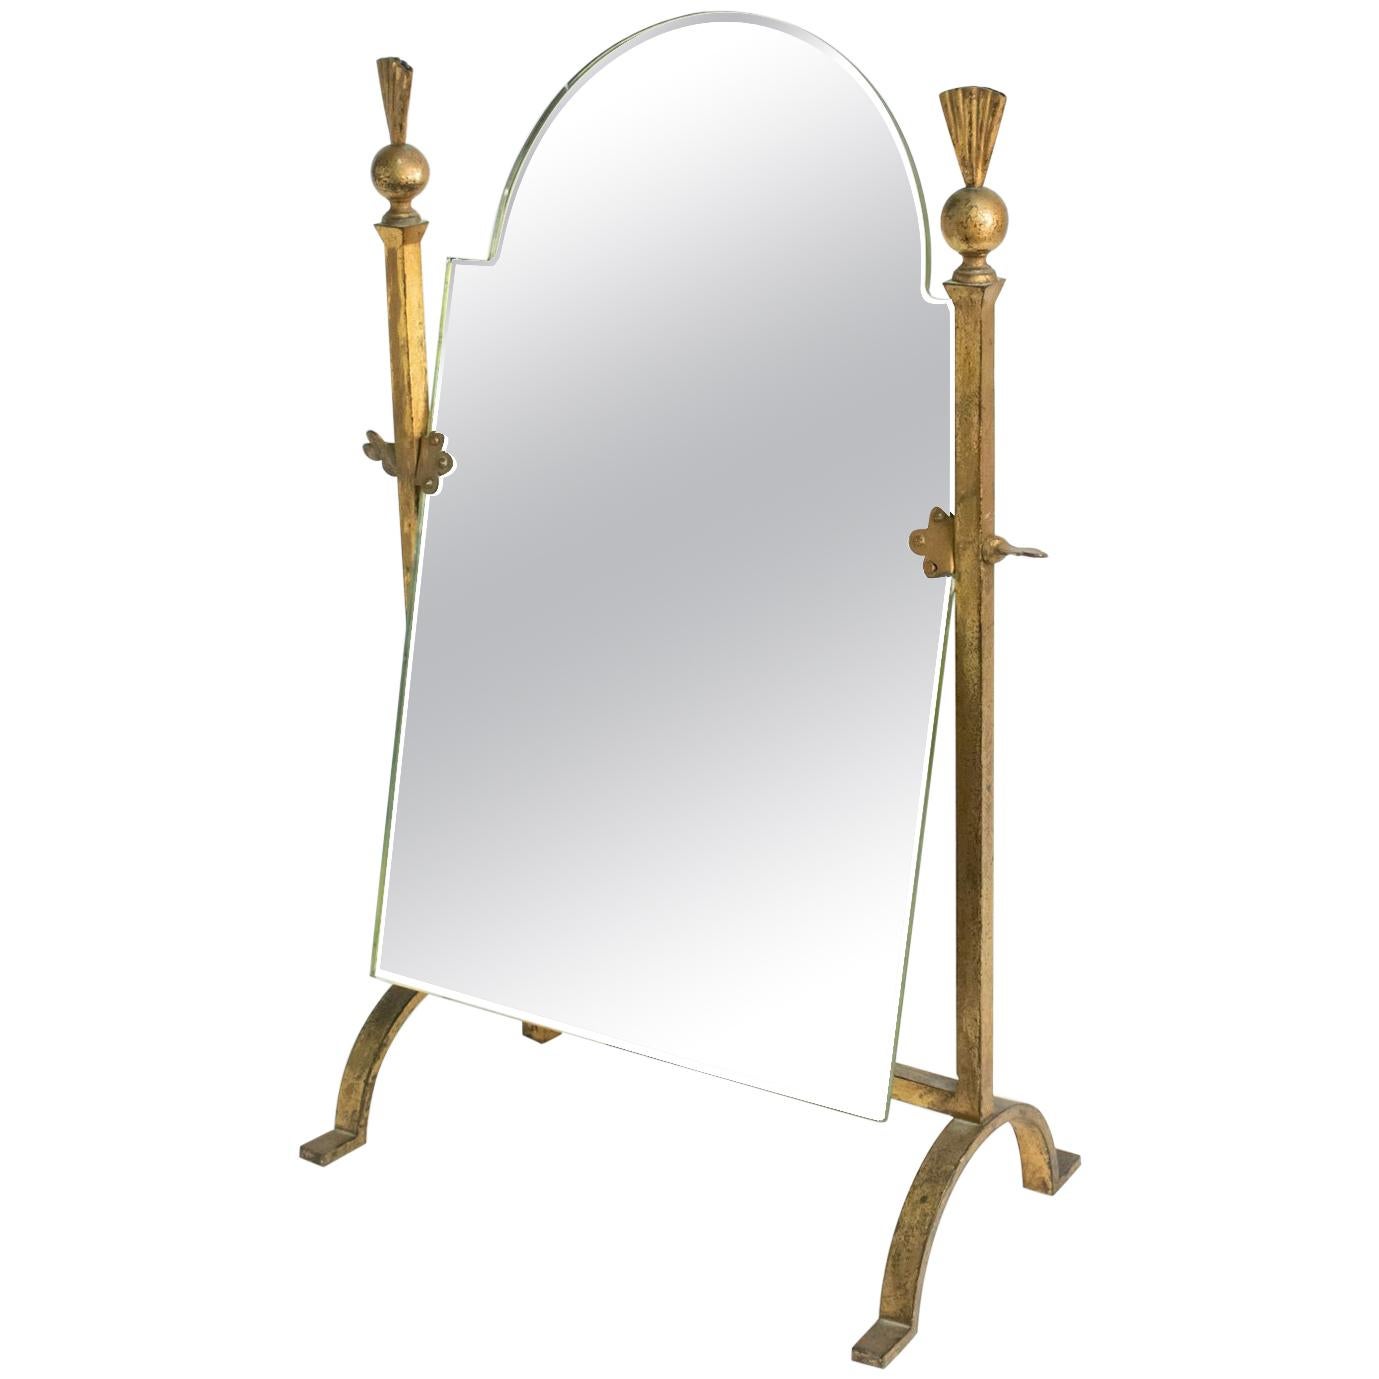 Mirror Golden Wrought Iron, Neoclassical 1960s, Mid Century Art For Sale